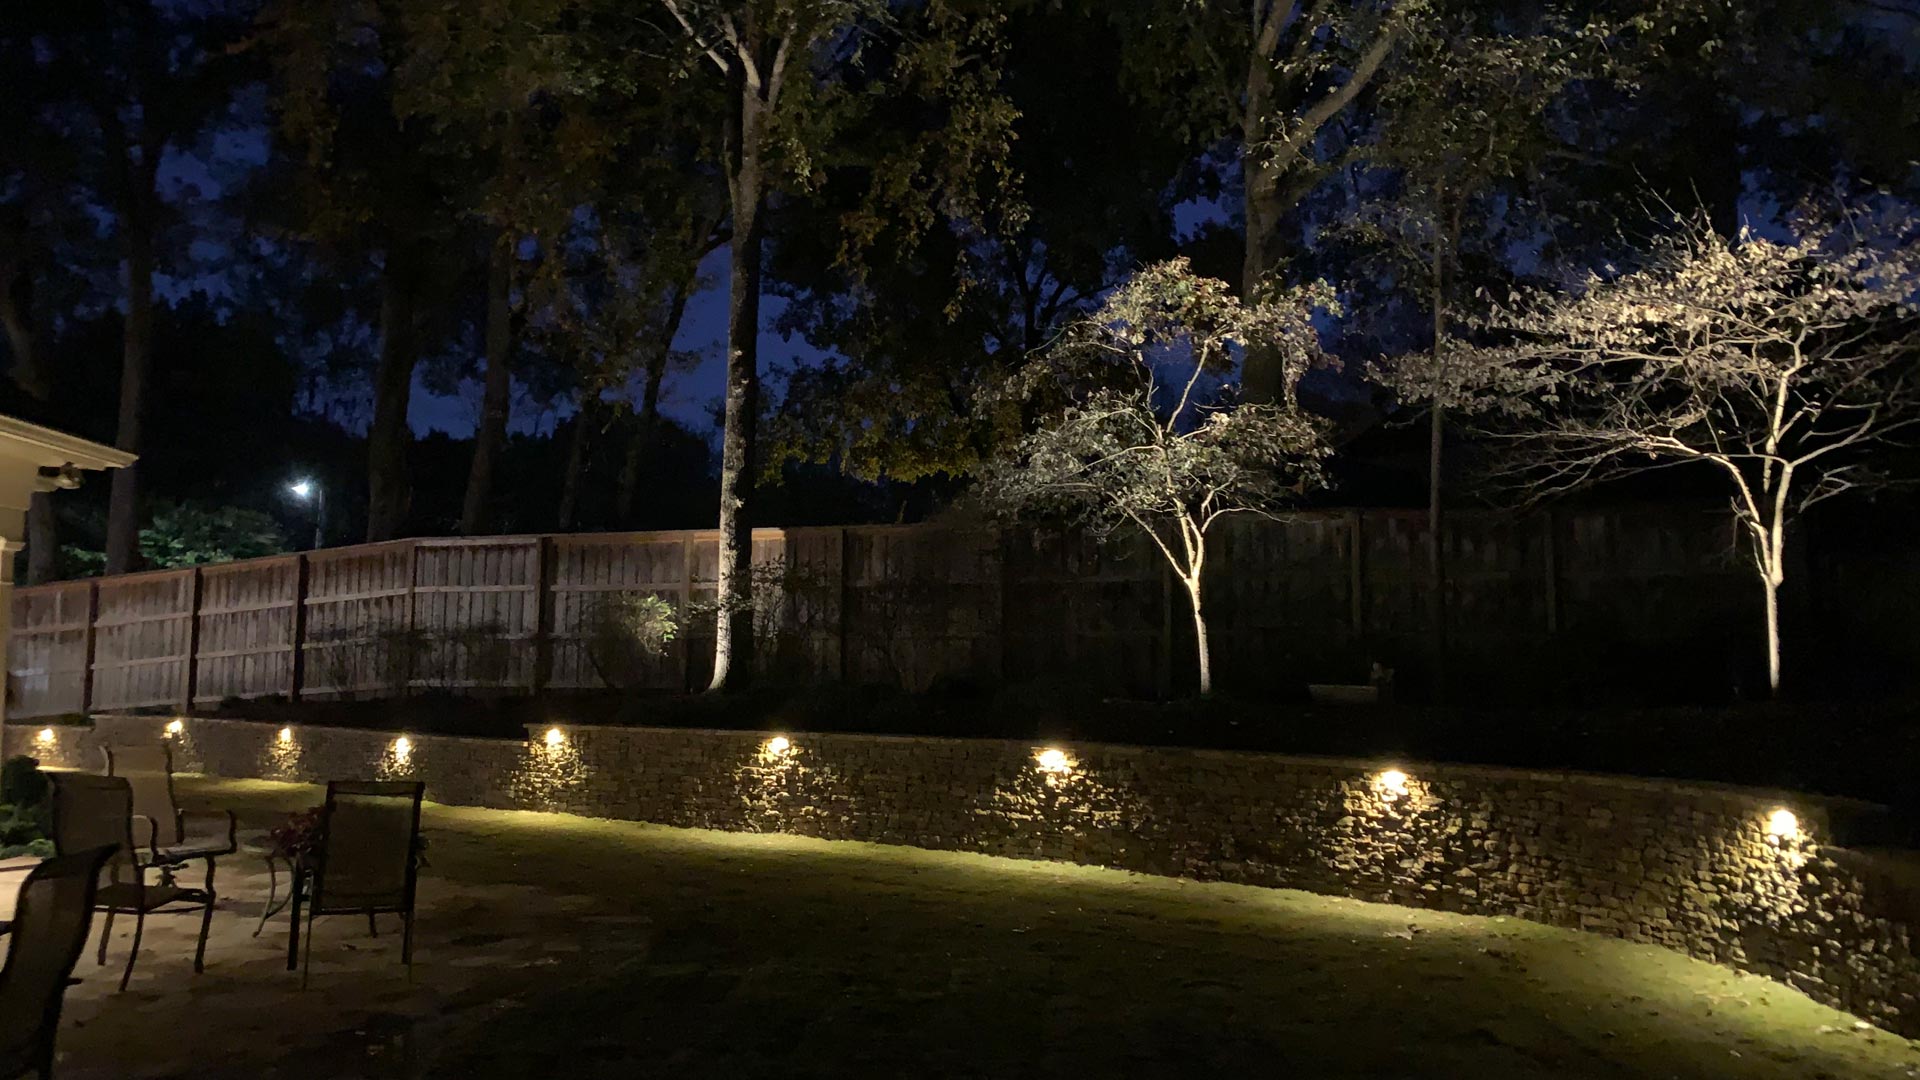 LED Bulbs Are the Smart Choice for Your Landscape Lighting